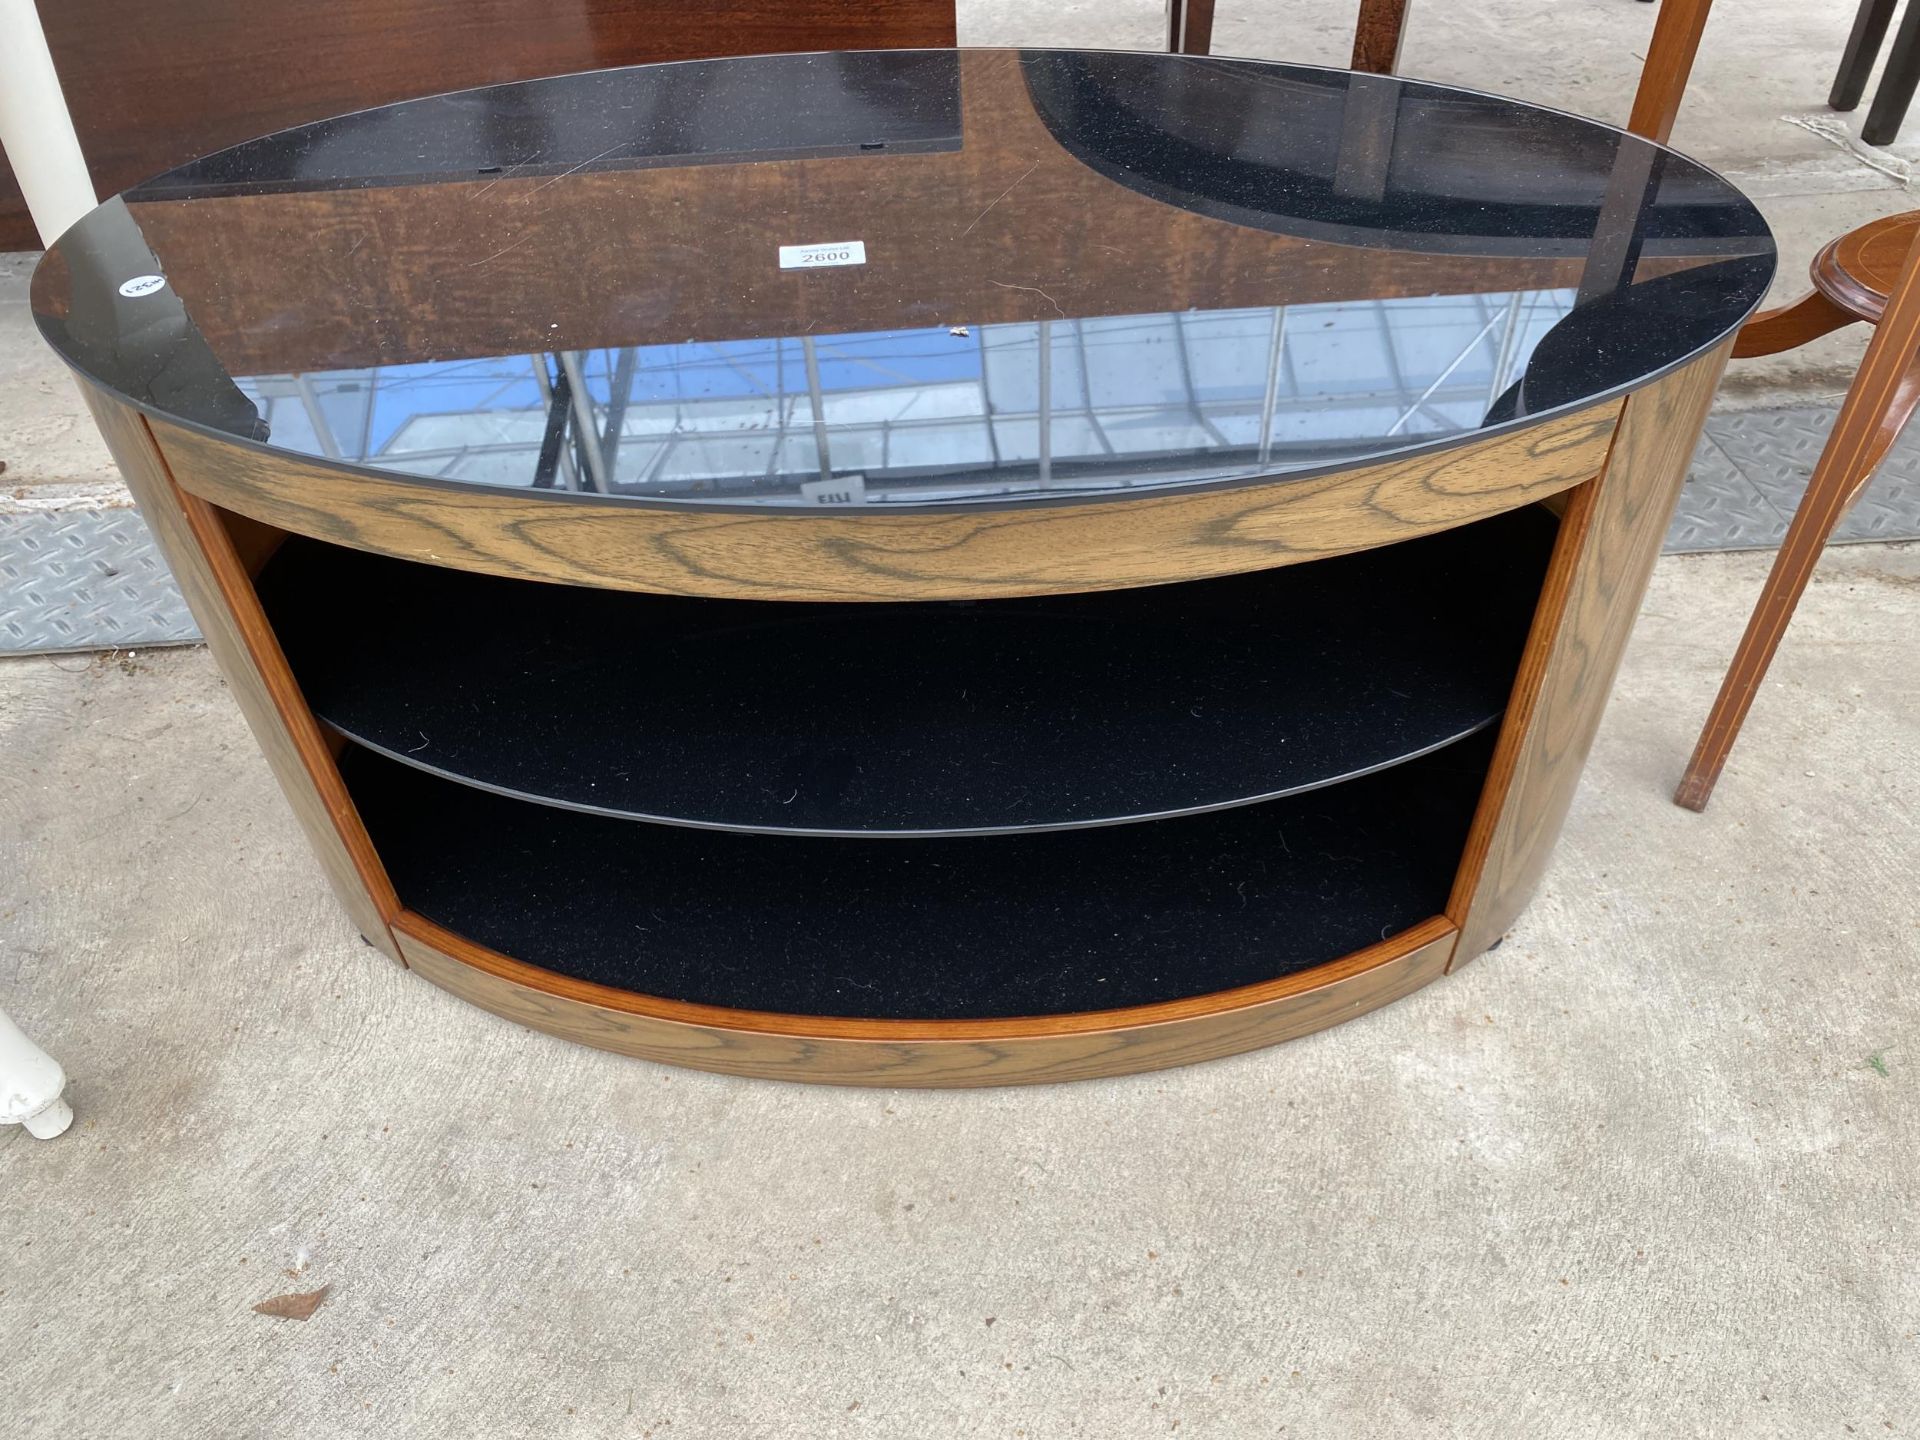 A MODERN OVAL TV STAND WITH THREE TIER GLASS SHELVES